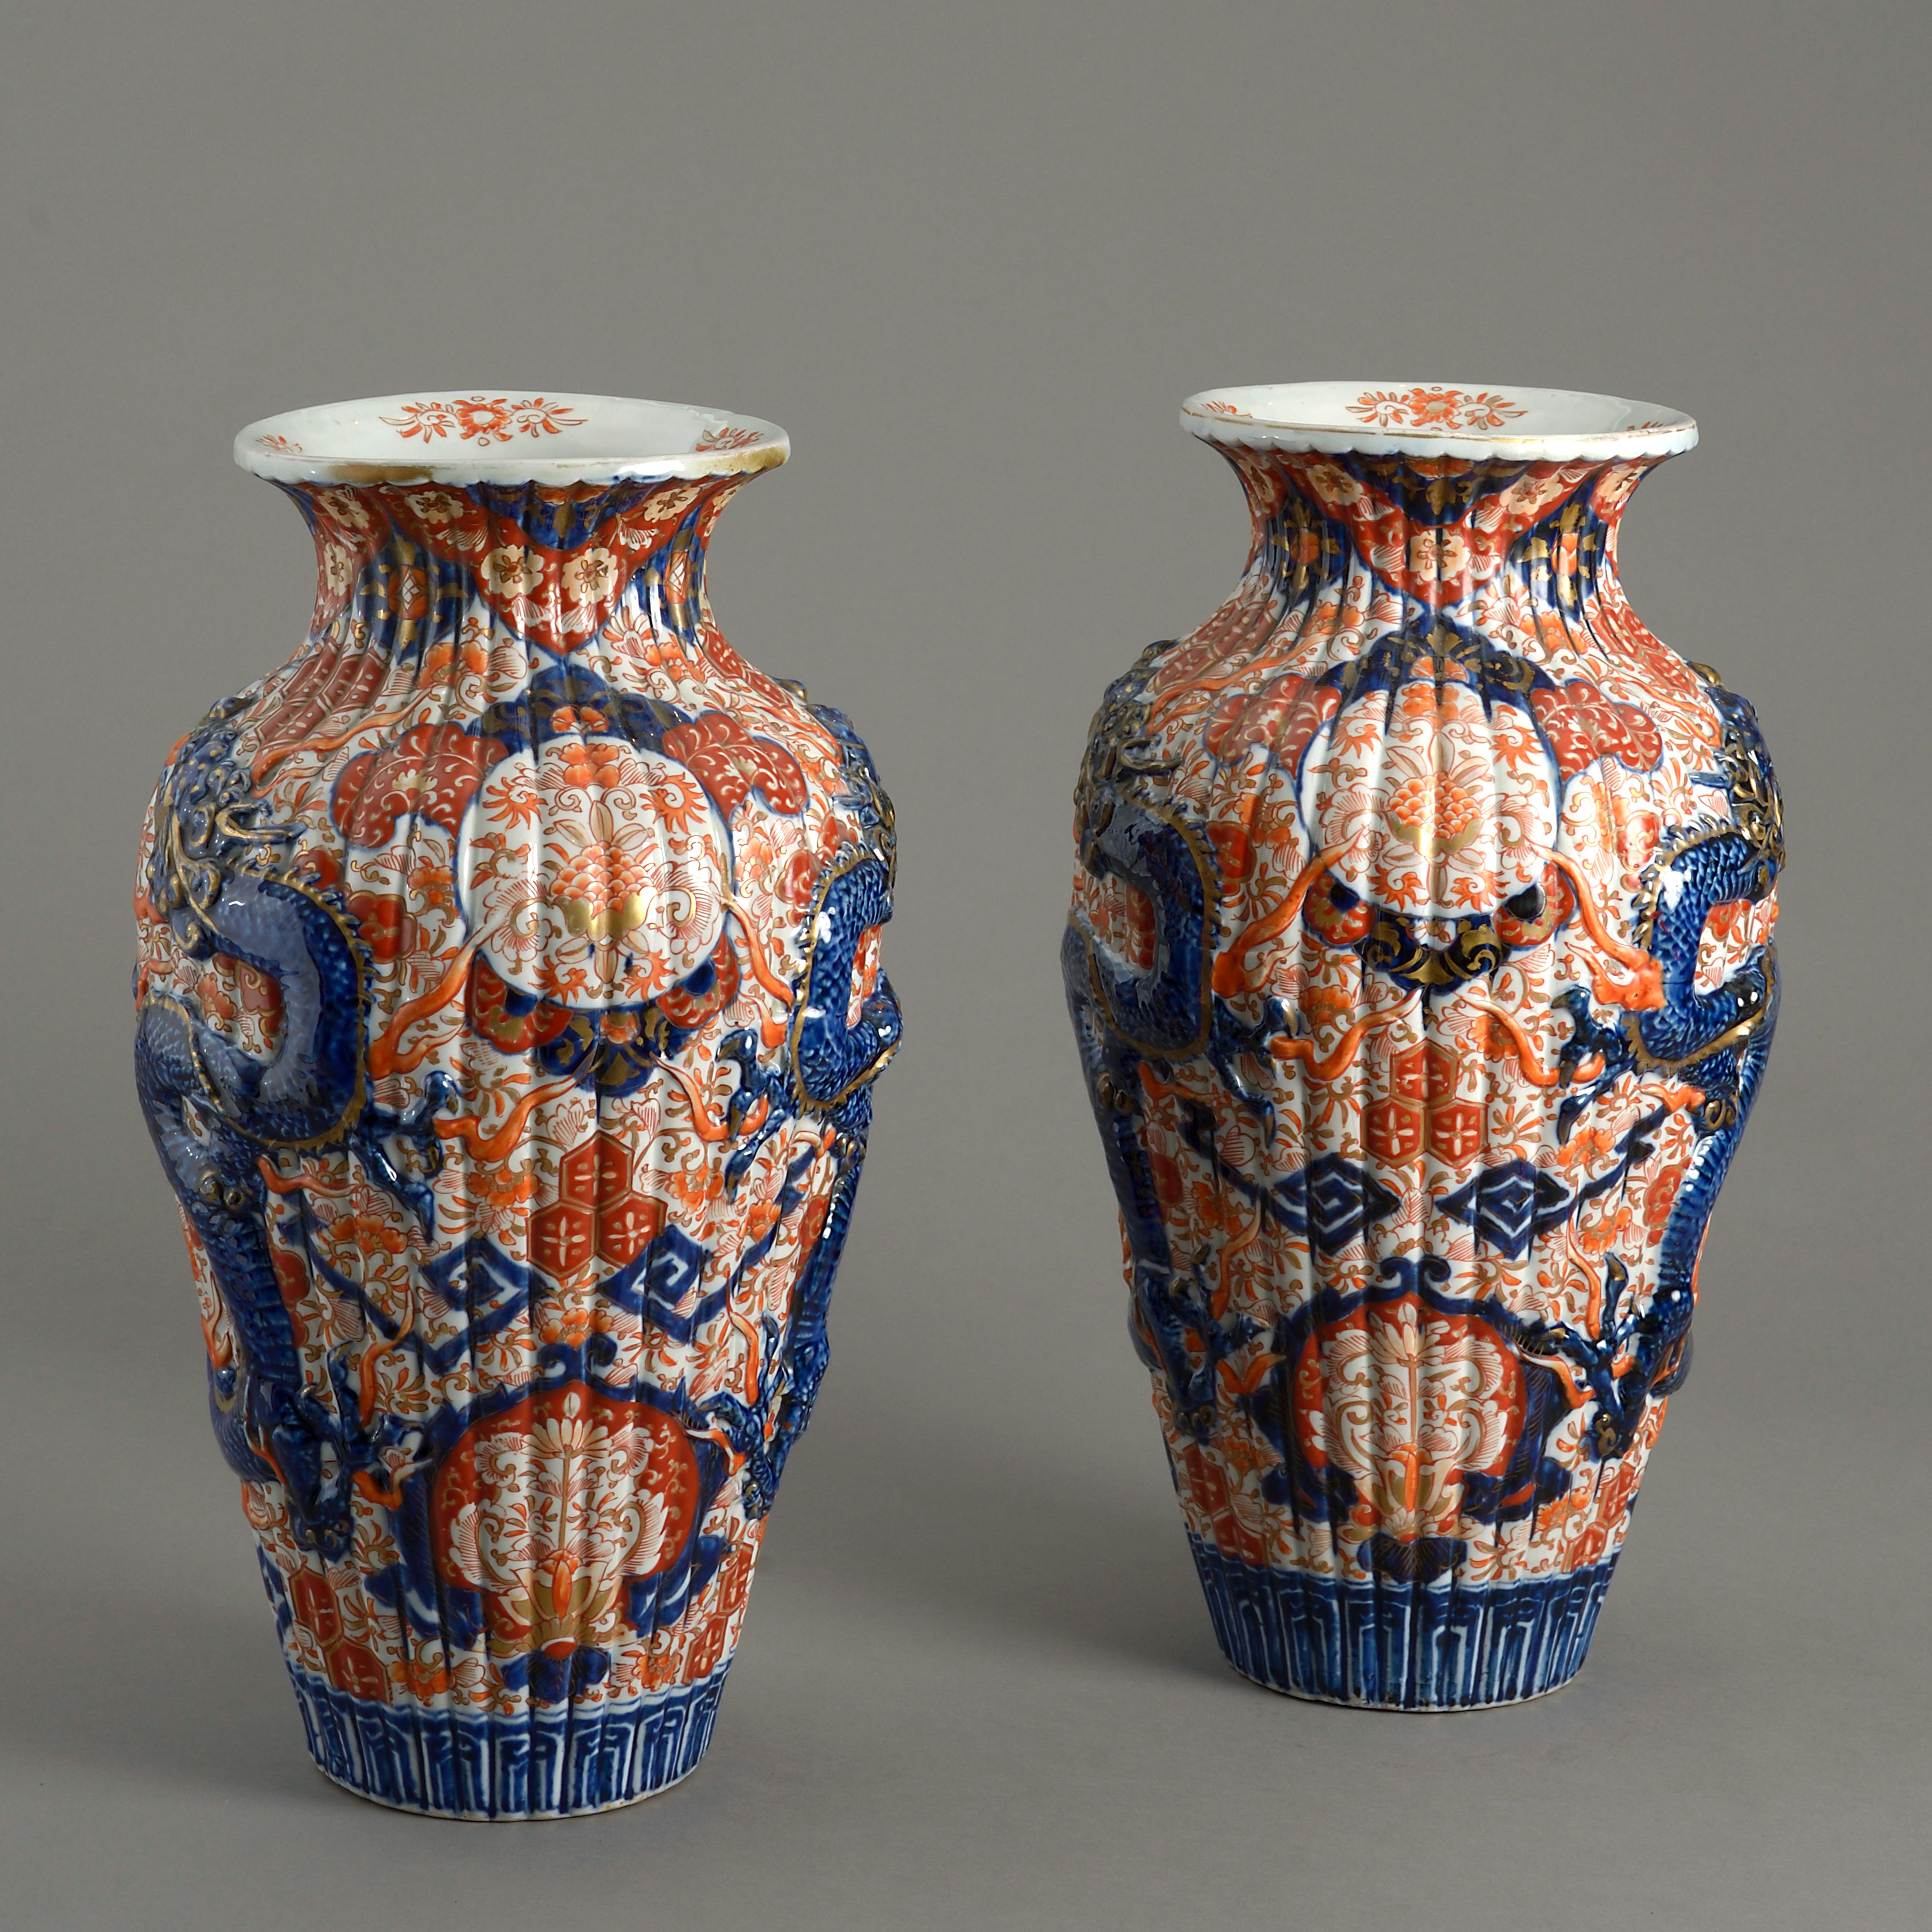 A fine pair of 19th century Imari porcelain vases, the bodies of ribbed form and with blue glazed dragons, modelled in relief, upon an intricately decorated ground in the traditional manner with red, blue and gilt glazes.
  